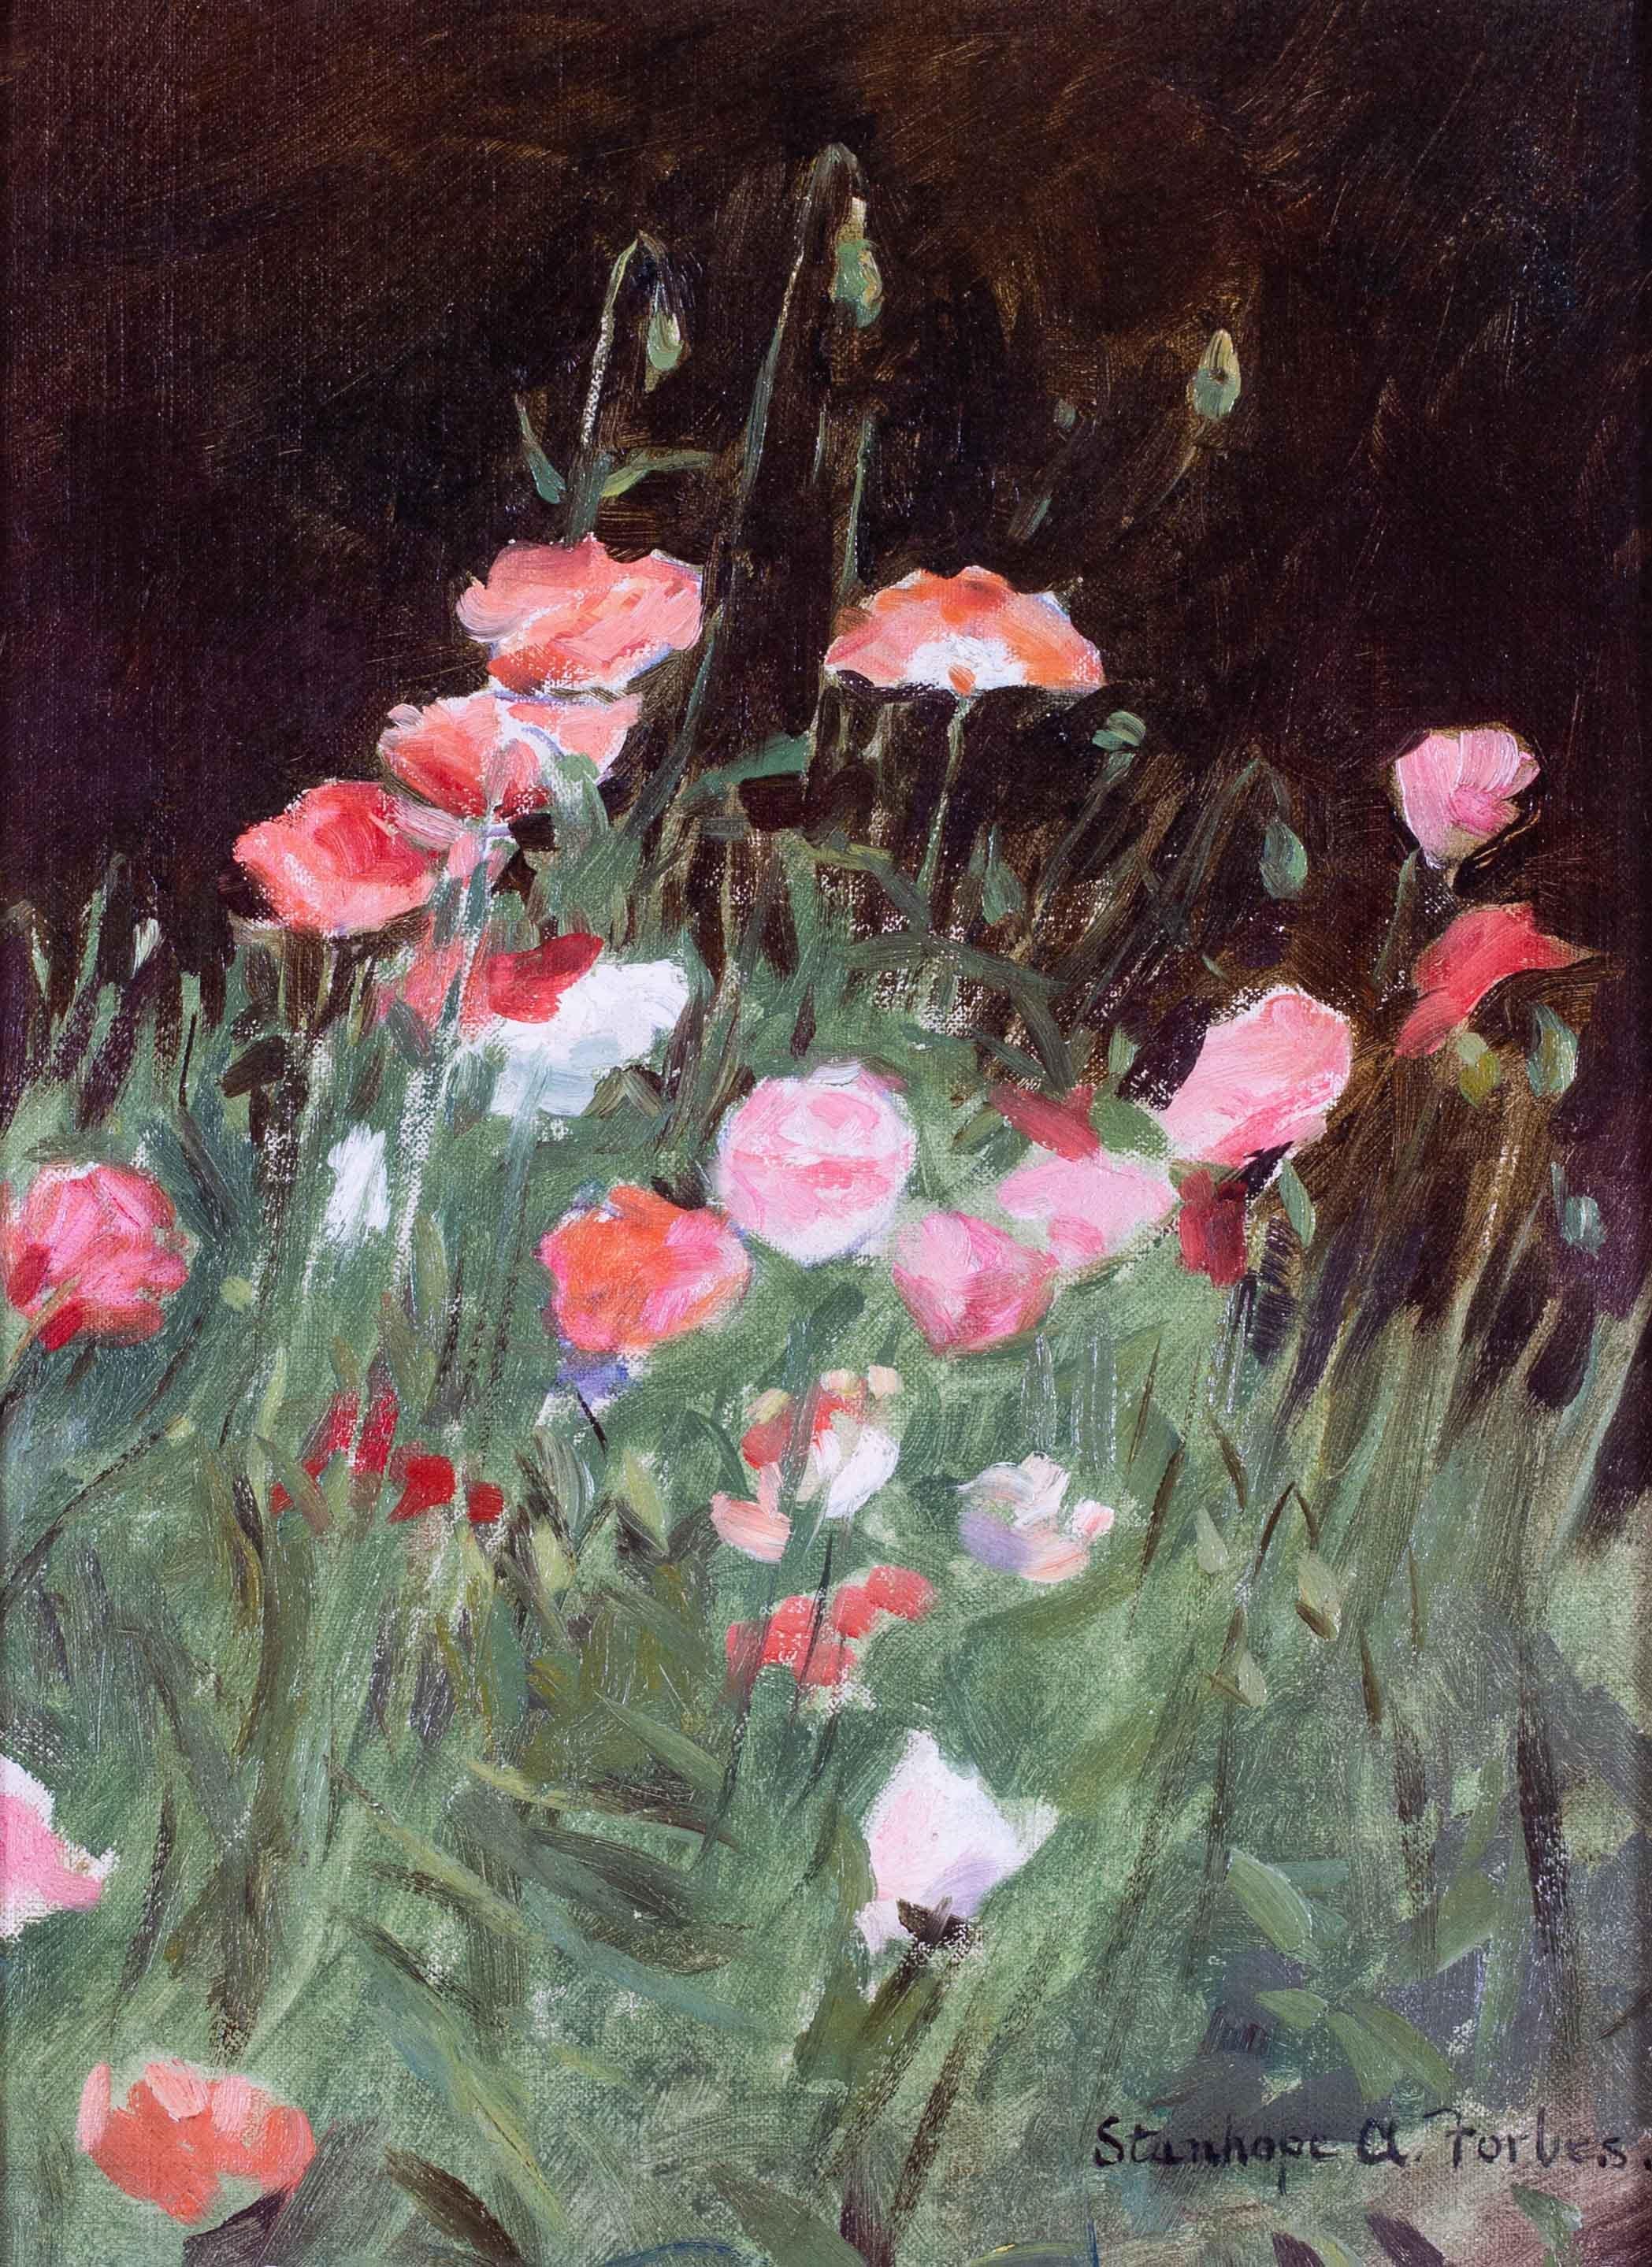 Stanhope A Forbes oil painting of poppies in a meadow, British, 20th Century - Painting by Stanhope Alexander Forbes